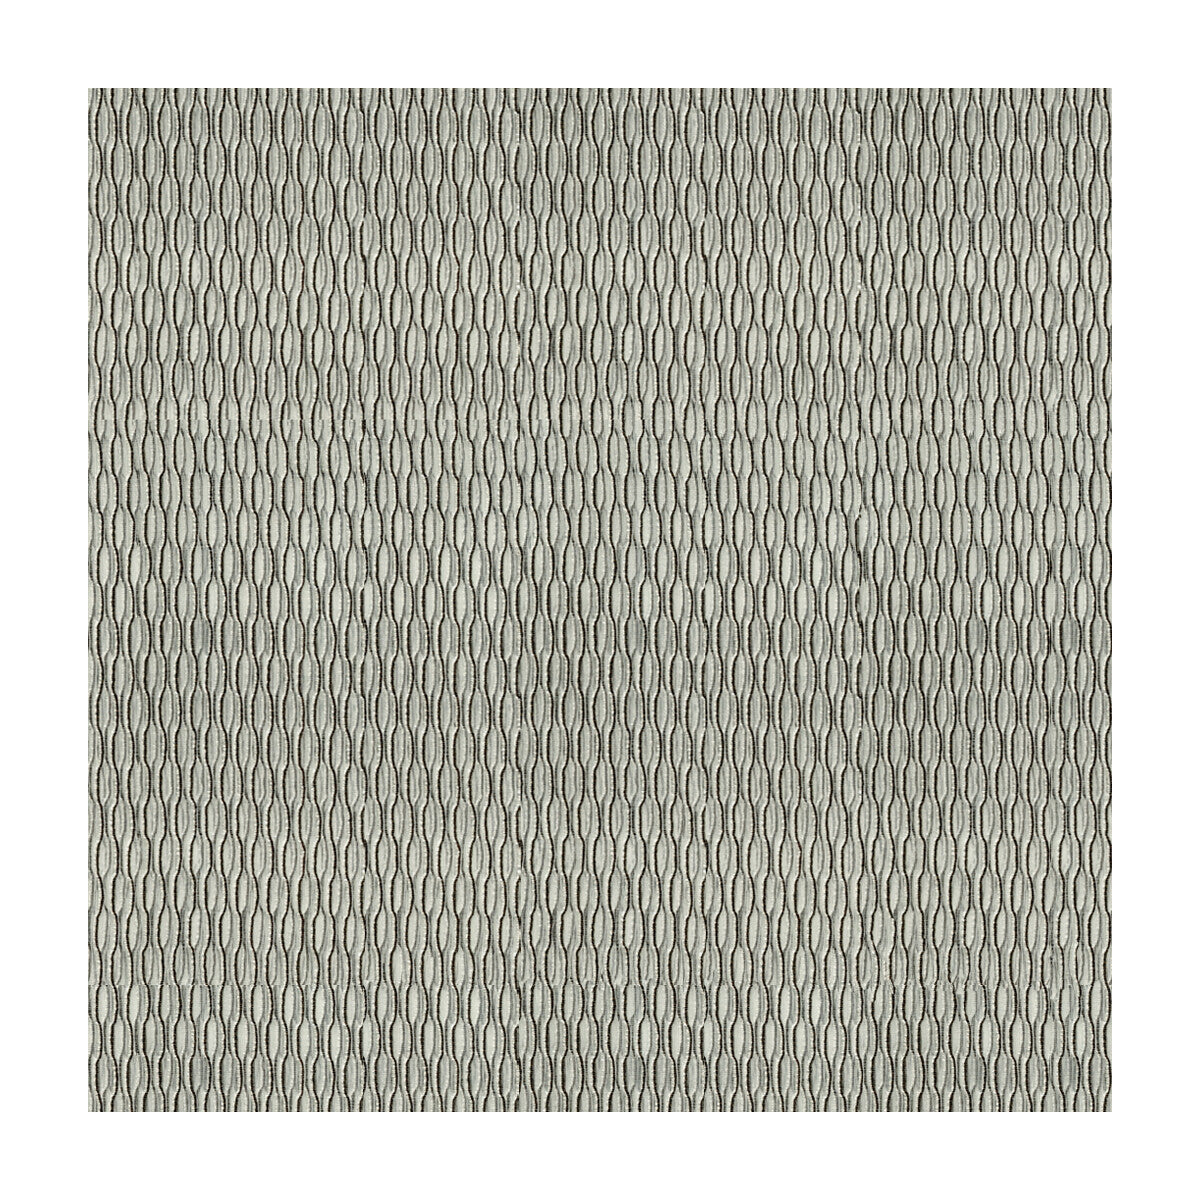 Kravet Contract fabric in 4149-81 color - pattern 4149.81.0 - by Kravet Contract